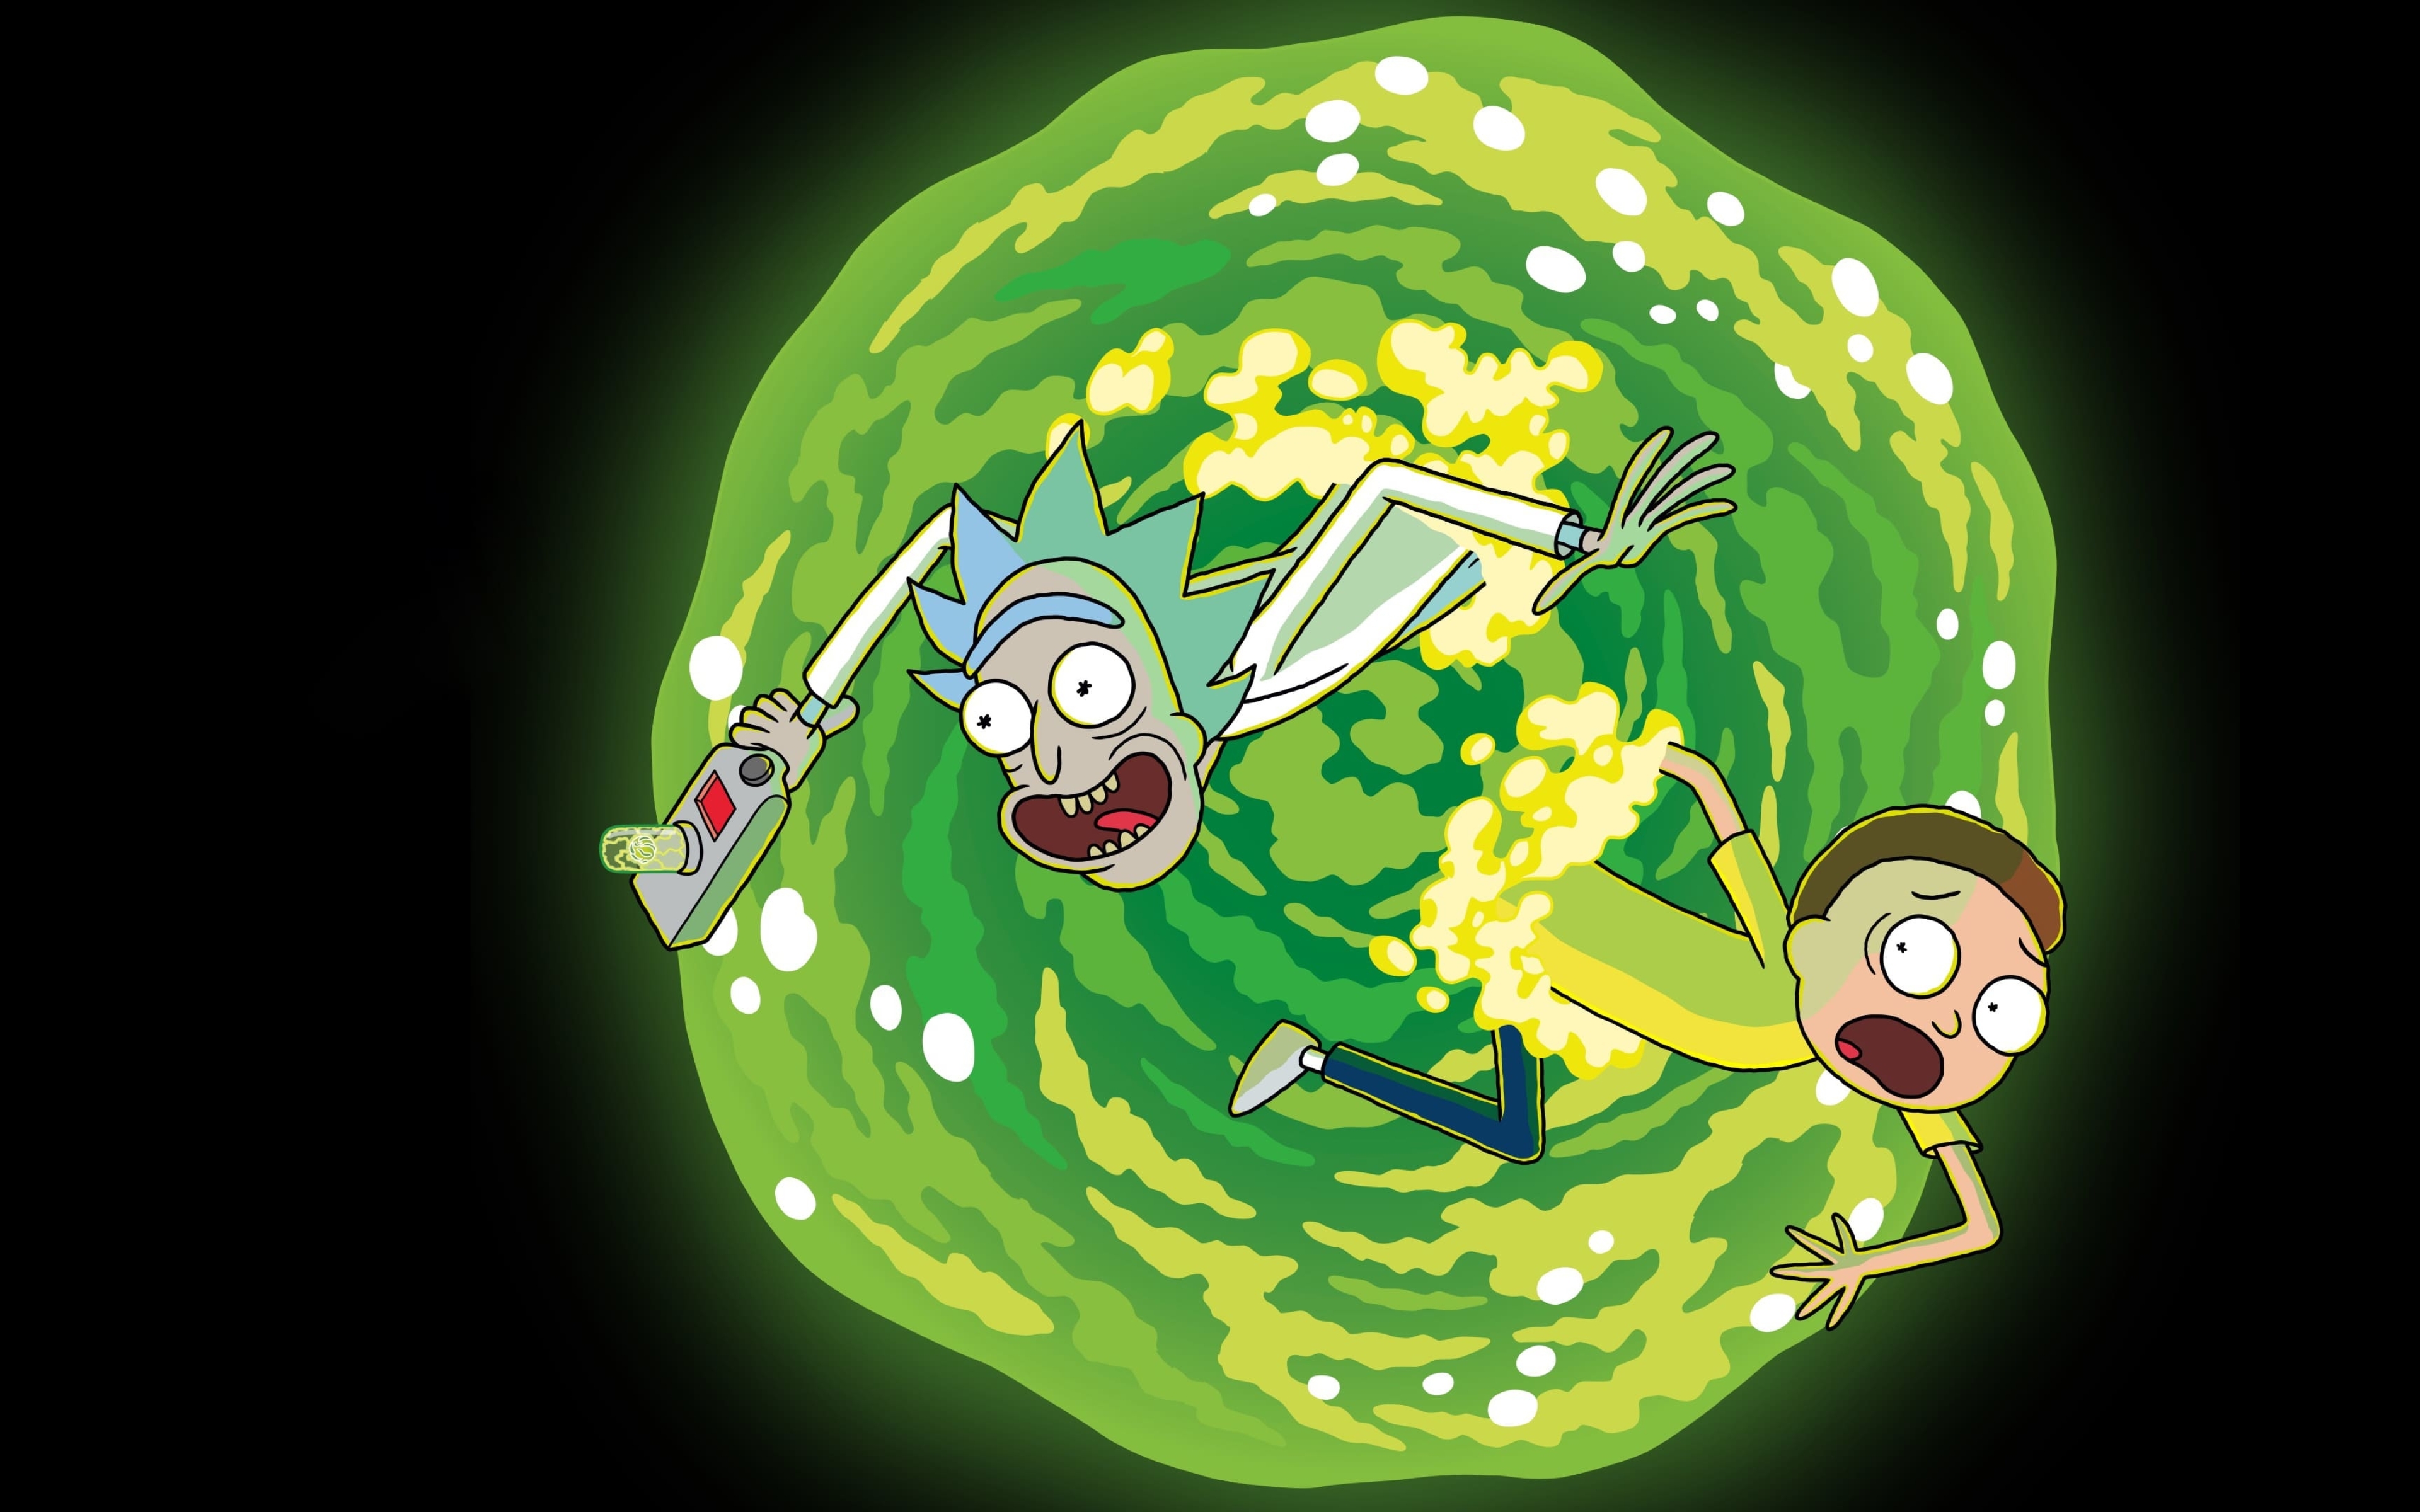 Rick And Morty Smartphone Wallpaper : 33+ Rick and Morty wallpapers ·① ...